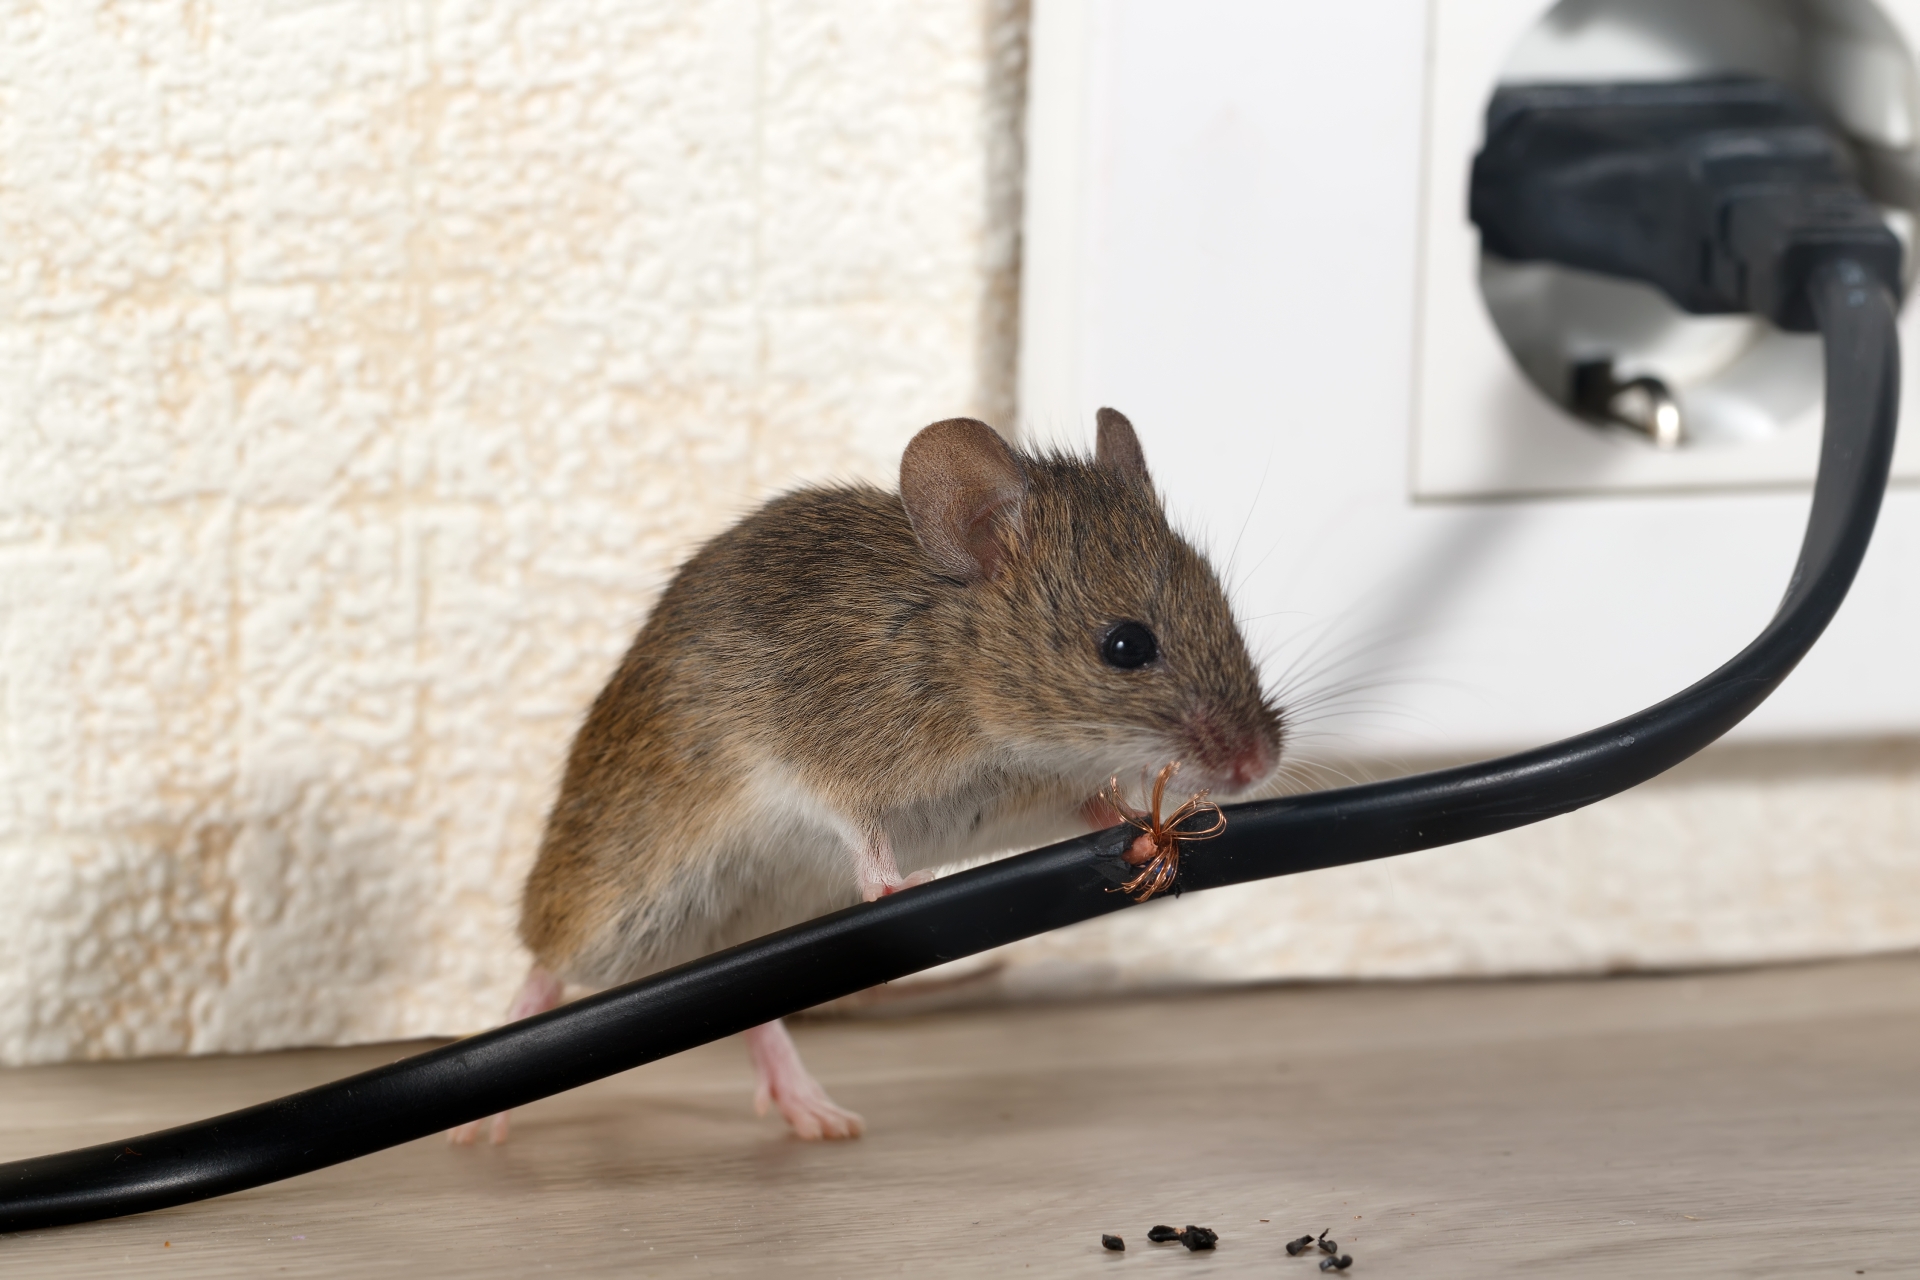 Mice Infestation, Pest Control in Catford, Hither Green, SE6. Call Now 020 8166 9746